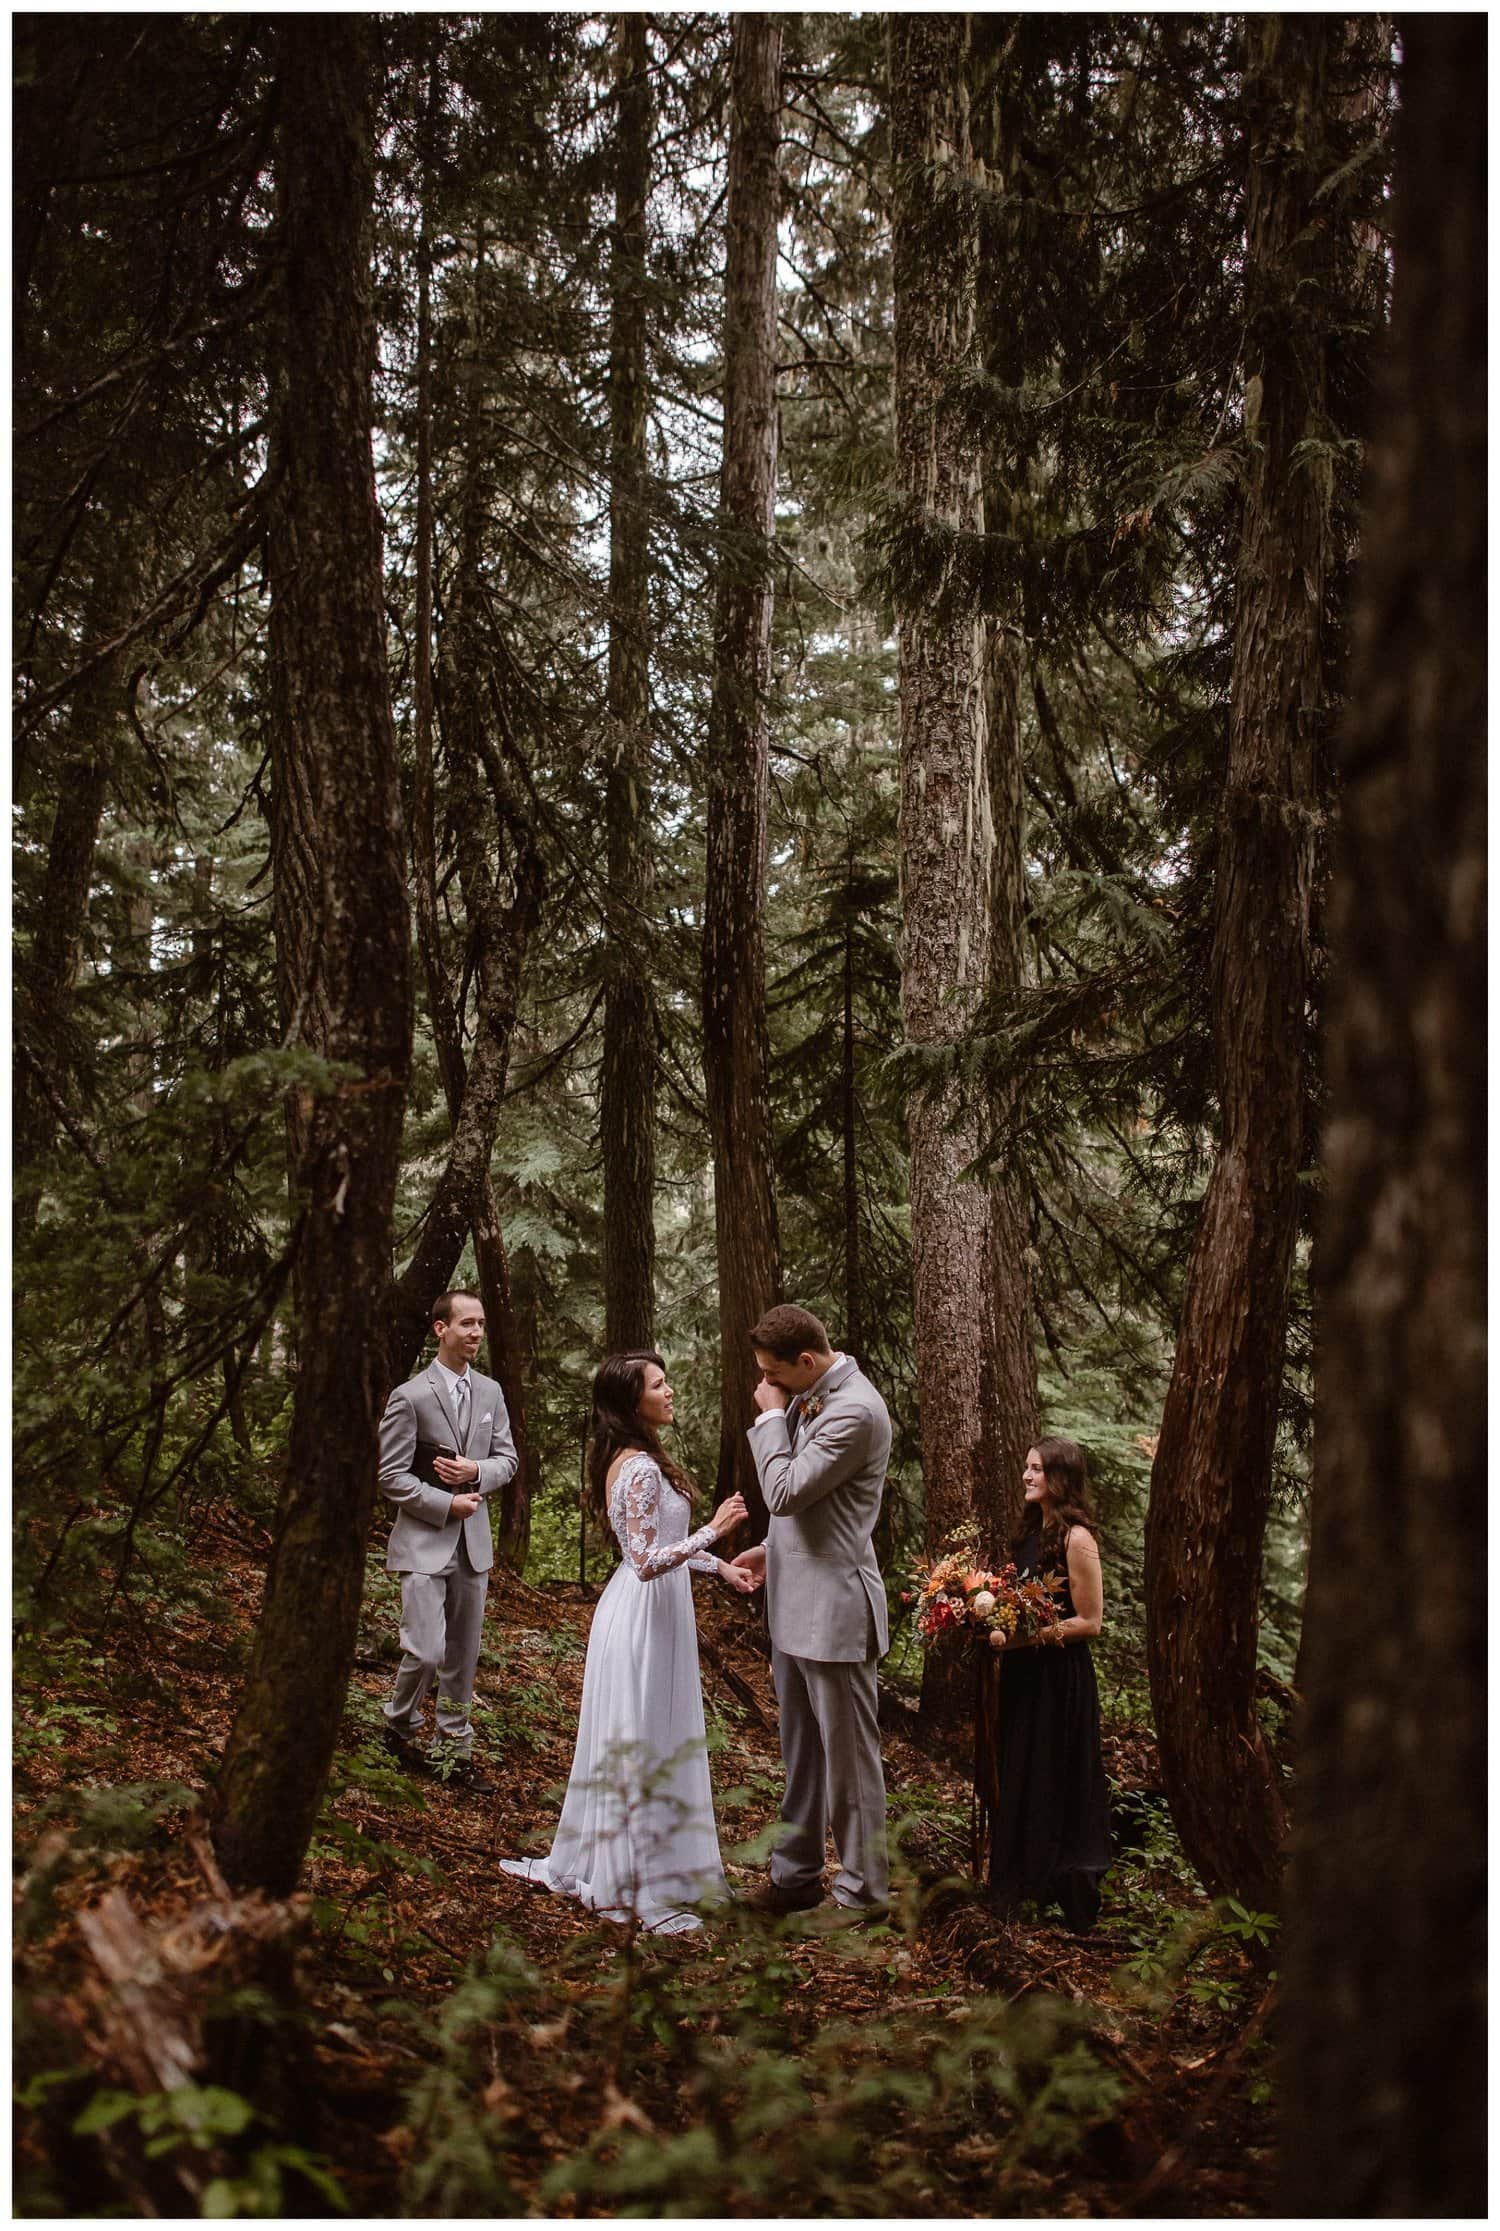 Bride and groom with a man and woman on either side of them during an intimate elopement ceremony in a forest. 